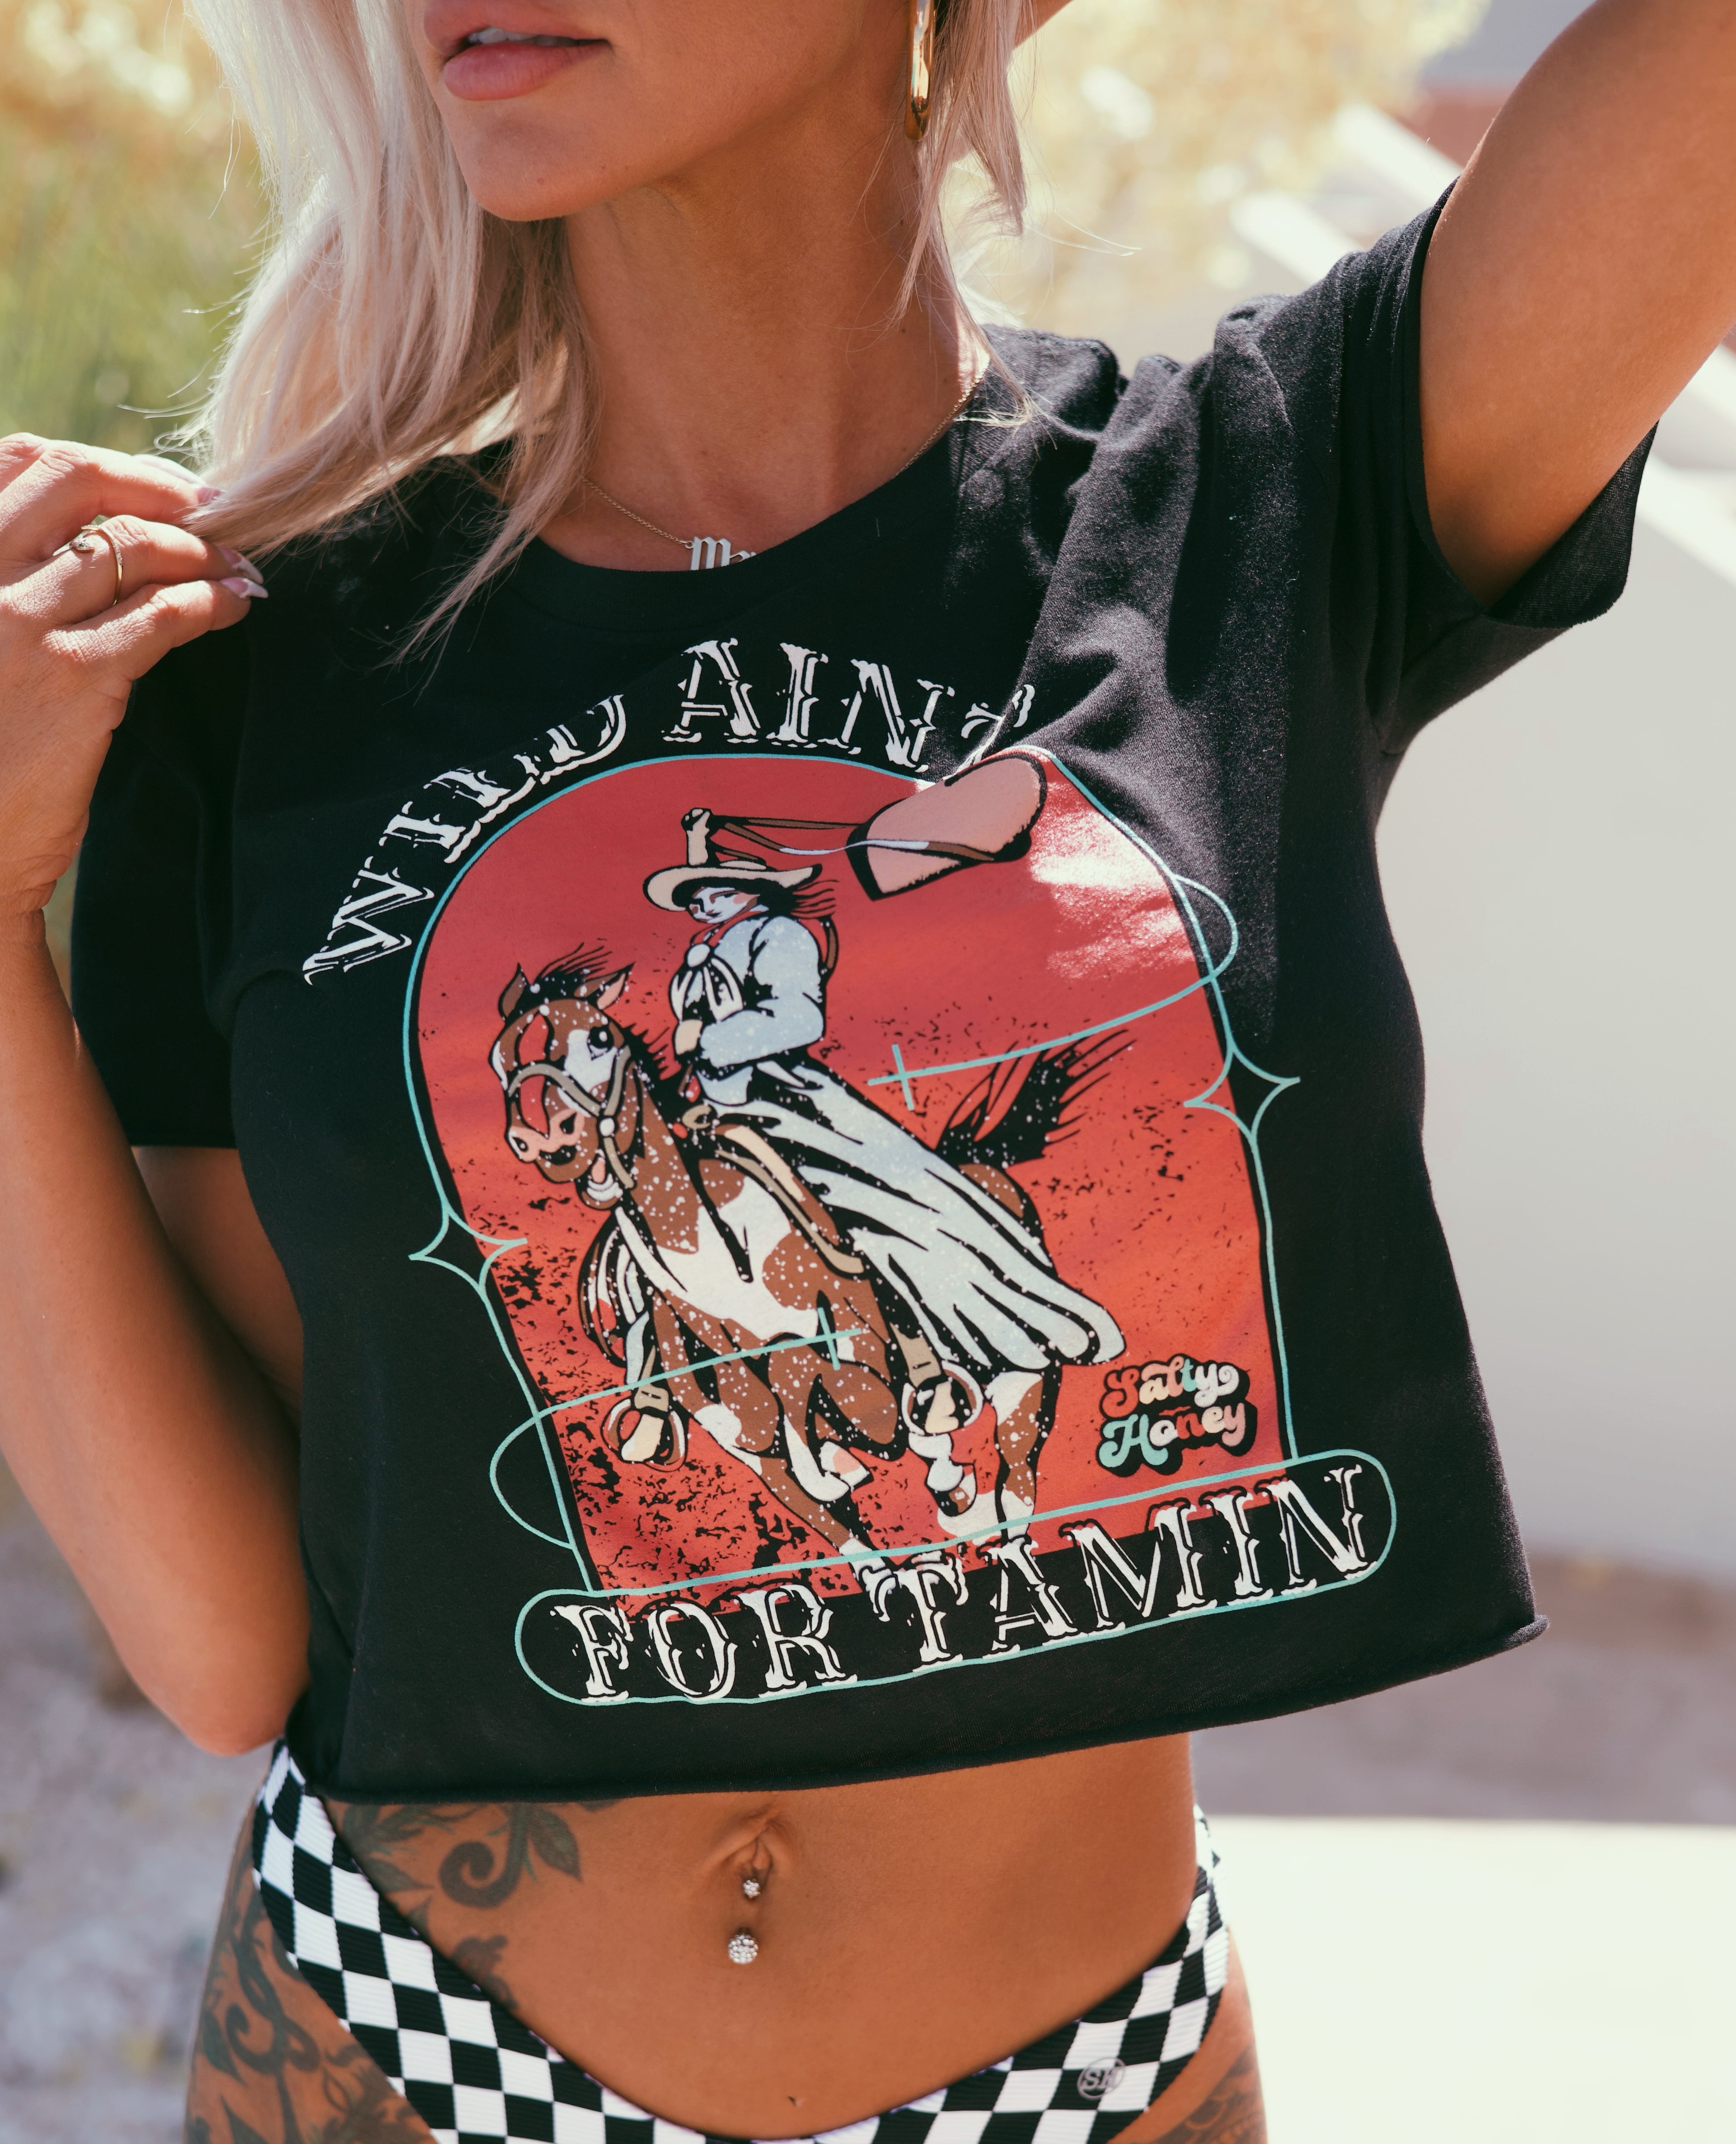 WILD AIN'T FOR TAMIN' graphic tee